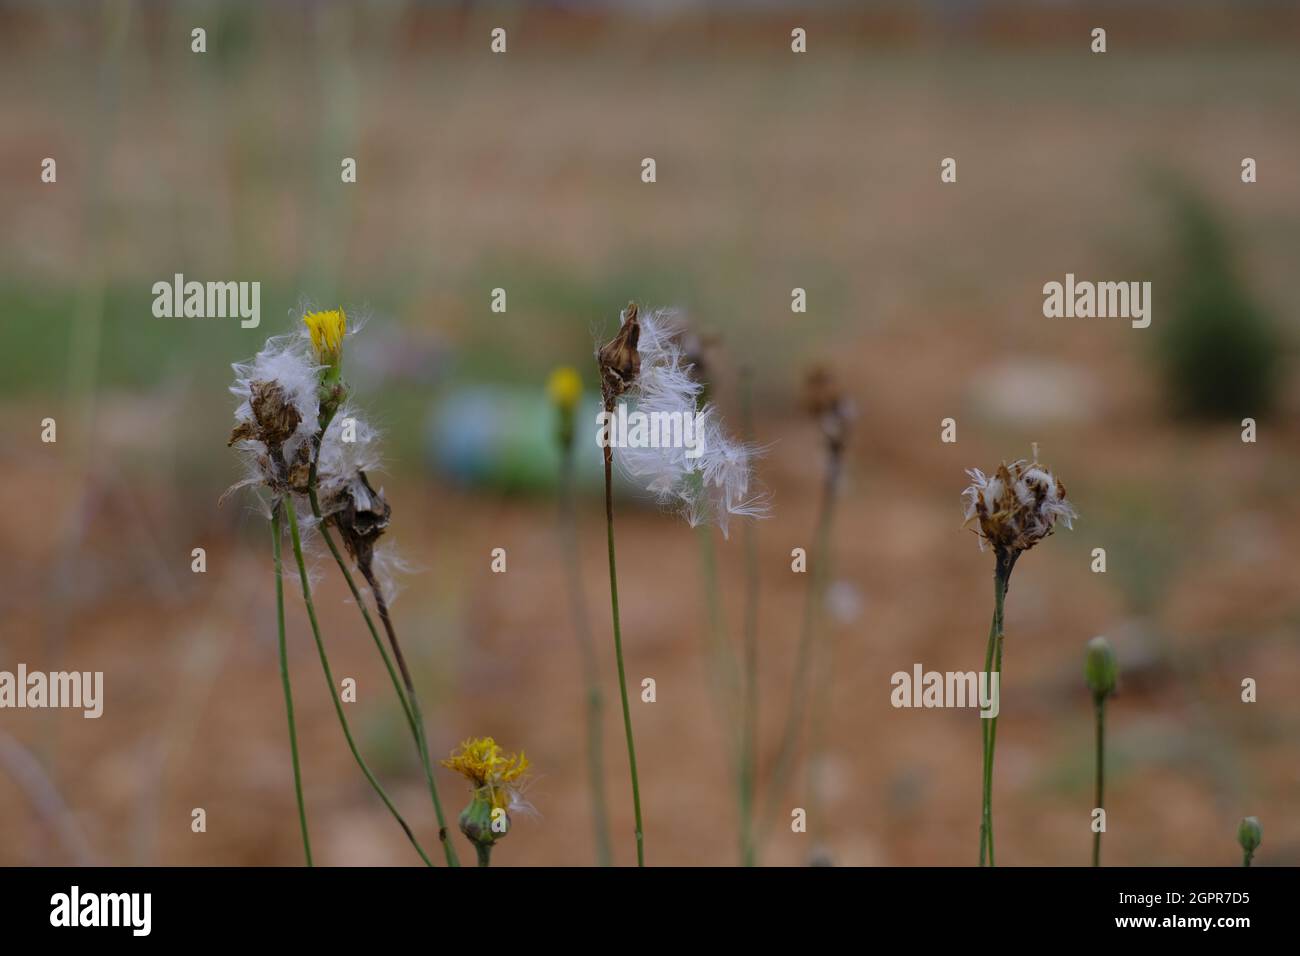 Selective focus shot of yellow-flowered and seeded faded dandelions in a field Stock Photo